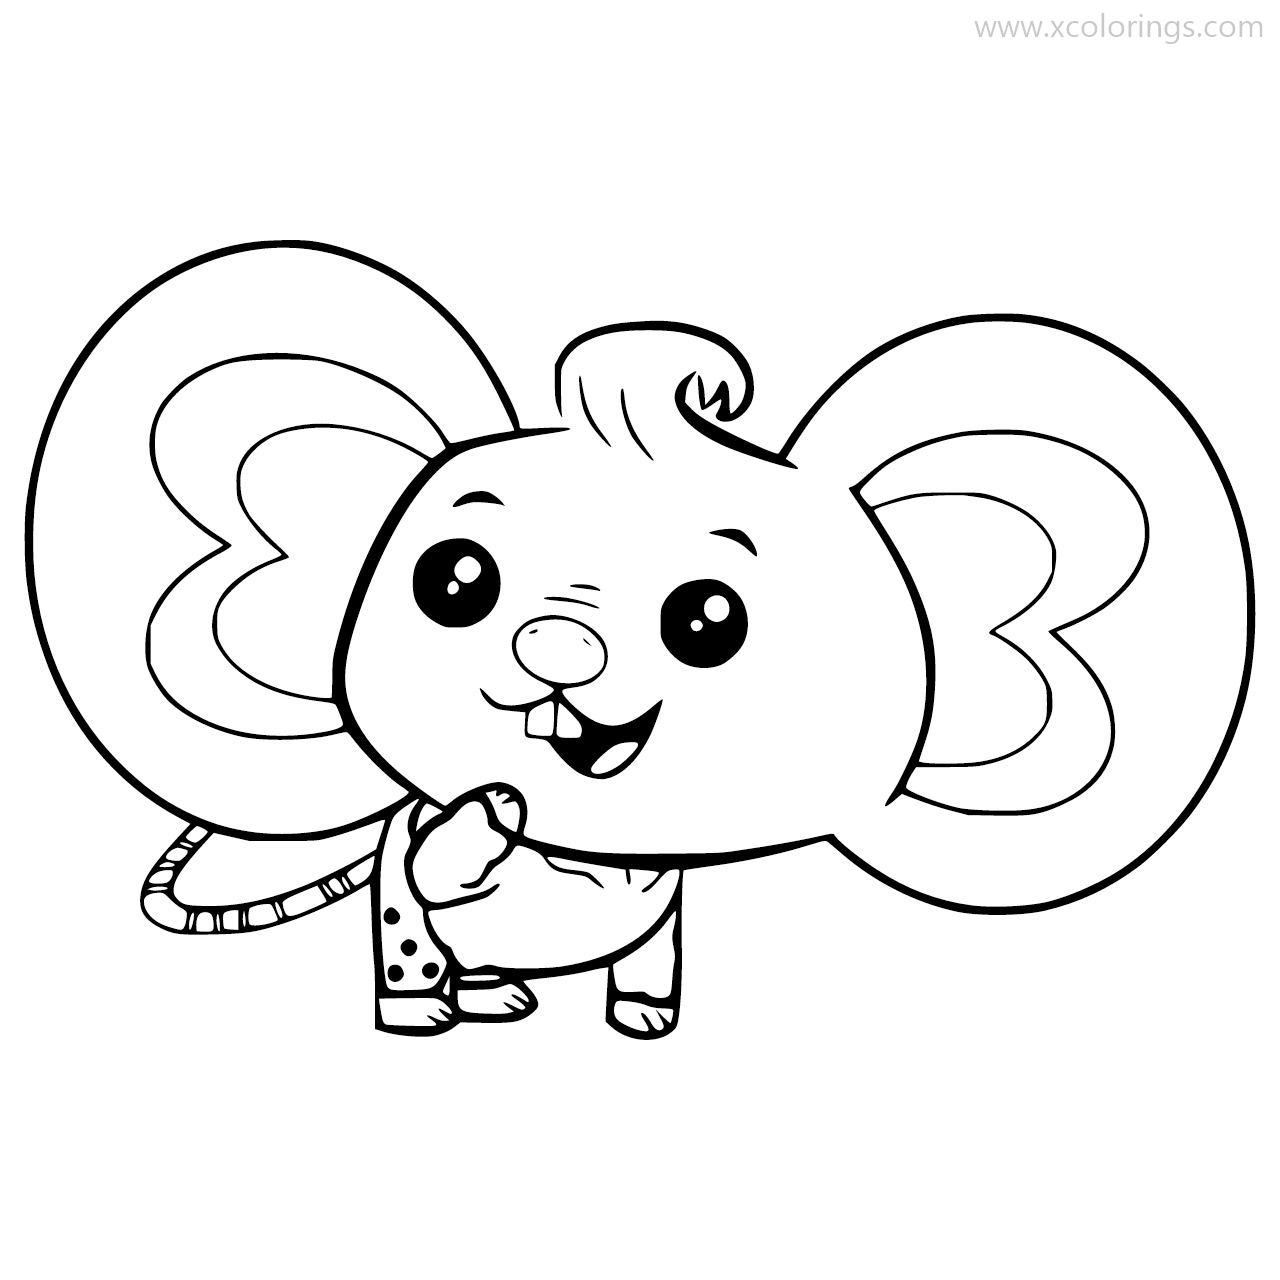 Free Chip and Potato Coloring Pages The Mouse printable